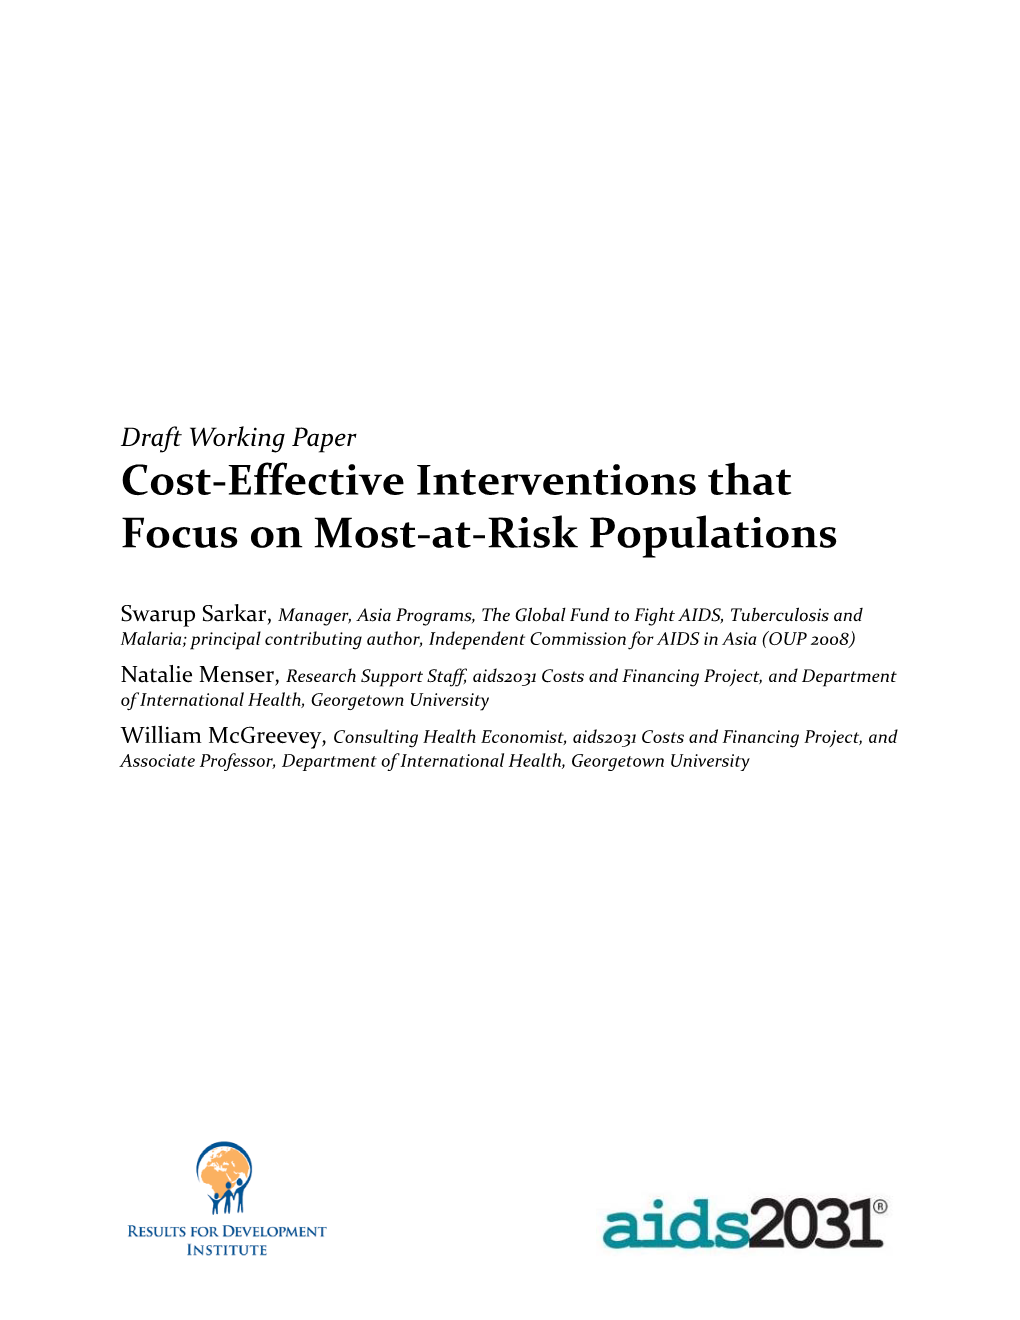 Cost-Effective Interventions That Focus on Most-At-Risk Populations